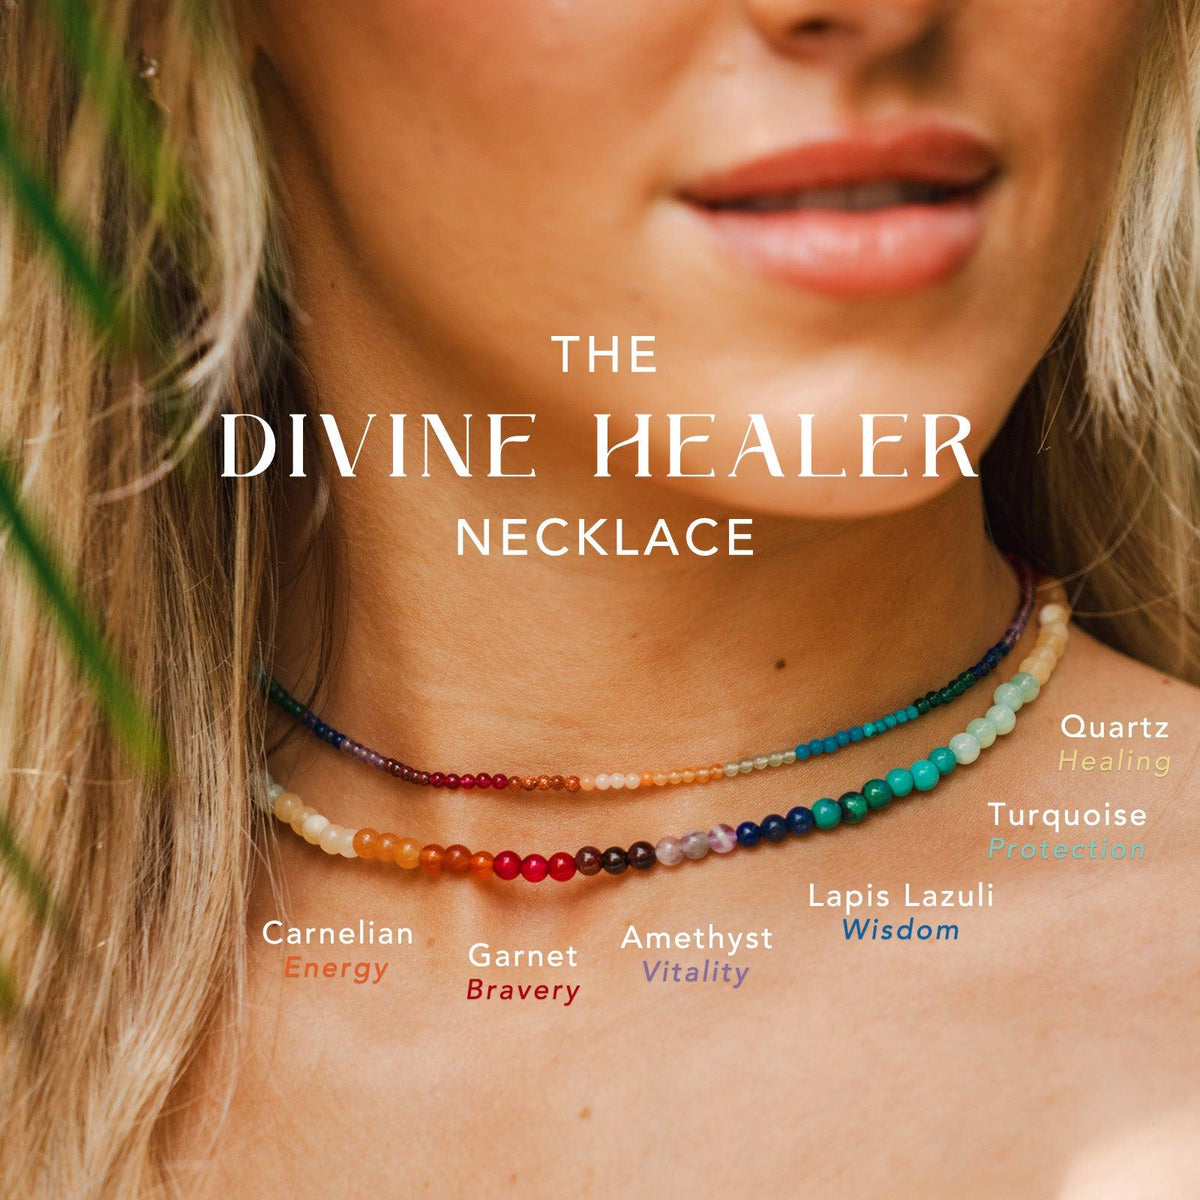 Model wearing a necklace stack. The stack includes a 4mm multicolor stone healing necklace and a 2mm multicolor stone healing necklace that have carnelian, garnet, amethyst, lapis lazuli, turquoise, quartz stones